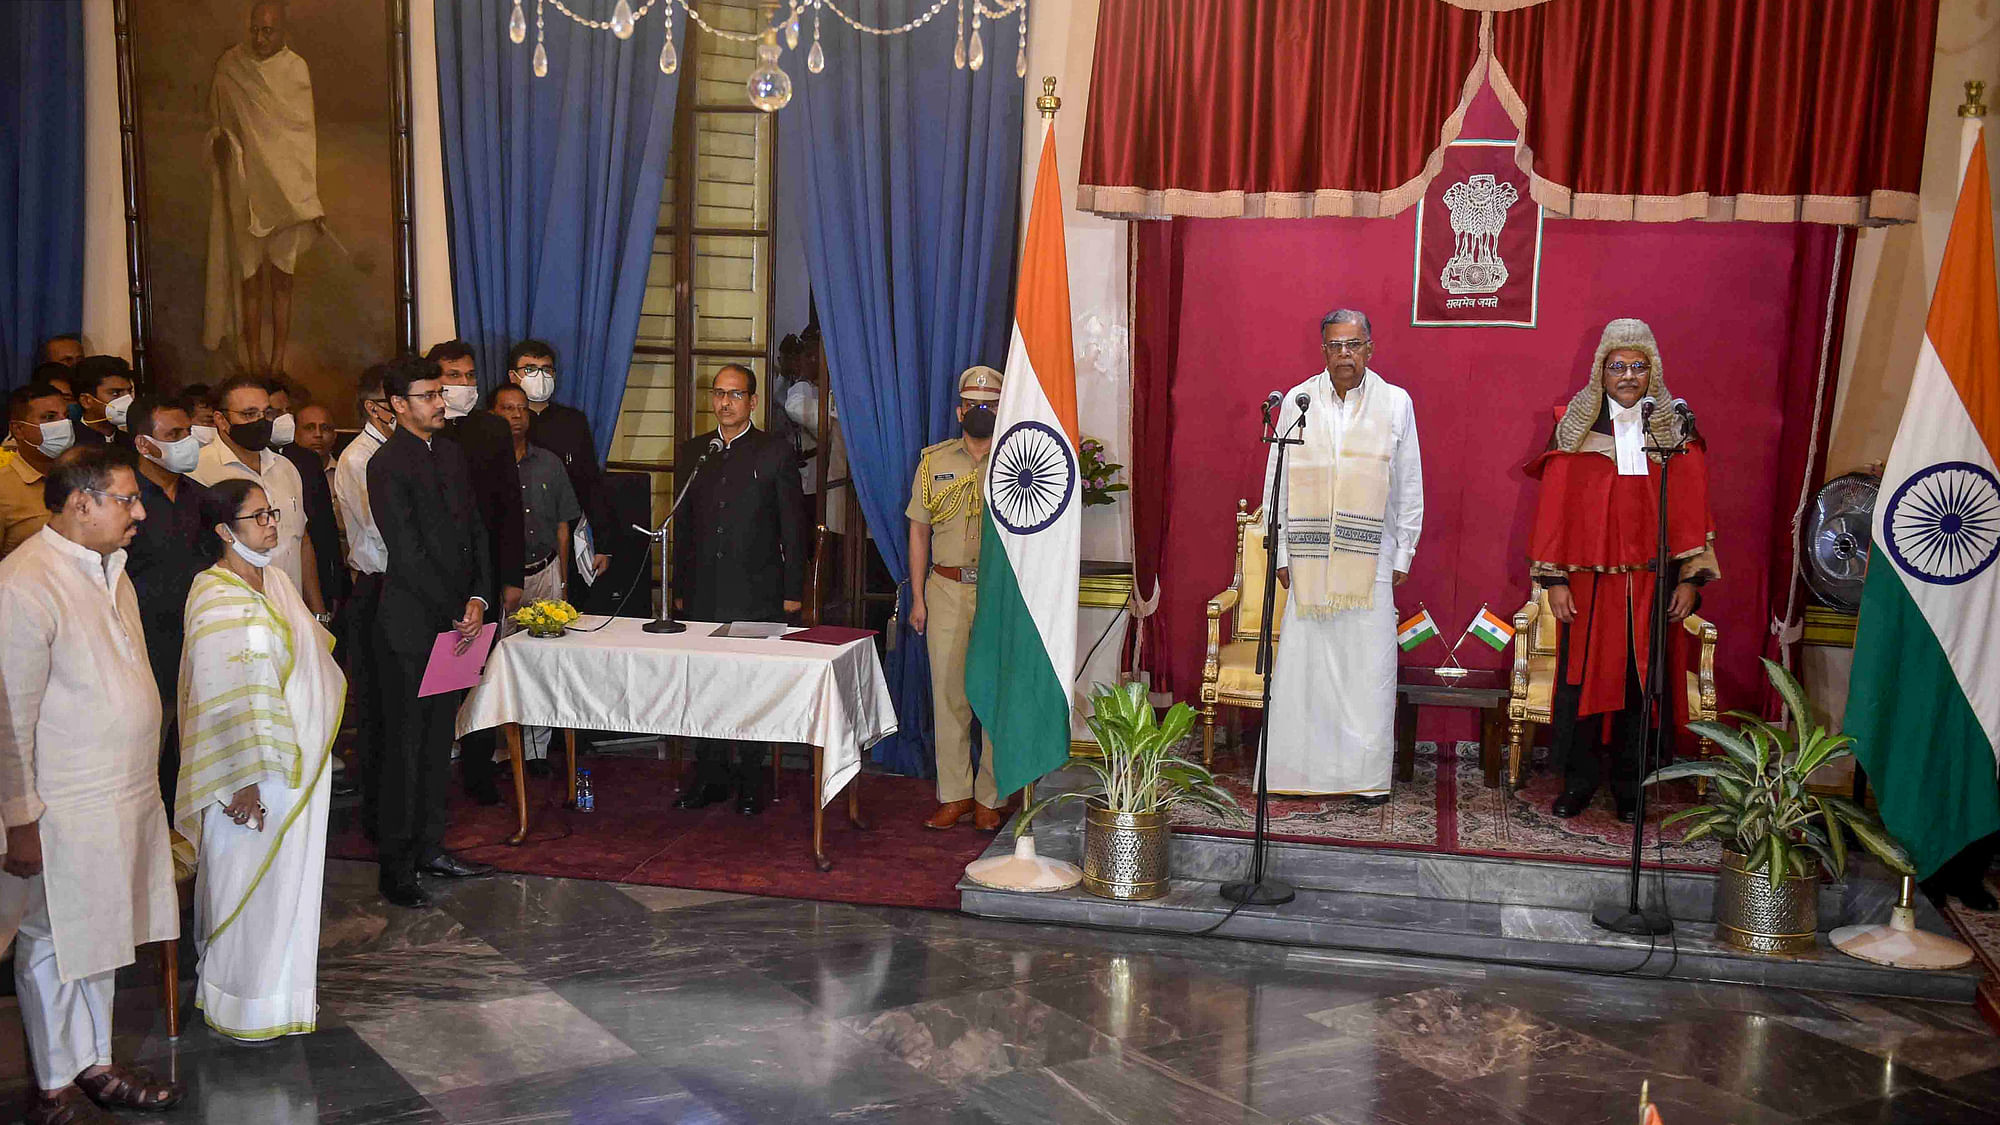 <div class="paragraphs"><p>Manipur Governor La. Ganesan being administered oath by Calcutta High Court Judge Prakash Shrivastava during his swearing-in ceremony, after he was given additional charge of West Bengal governor, in Kolkata.</p></div>